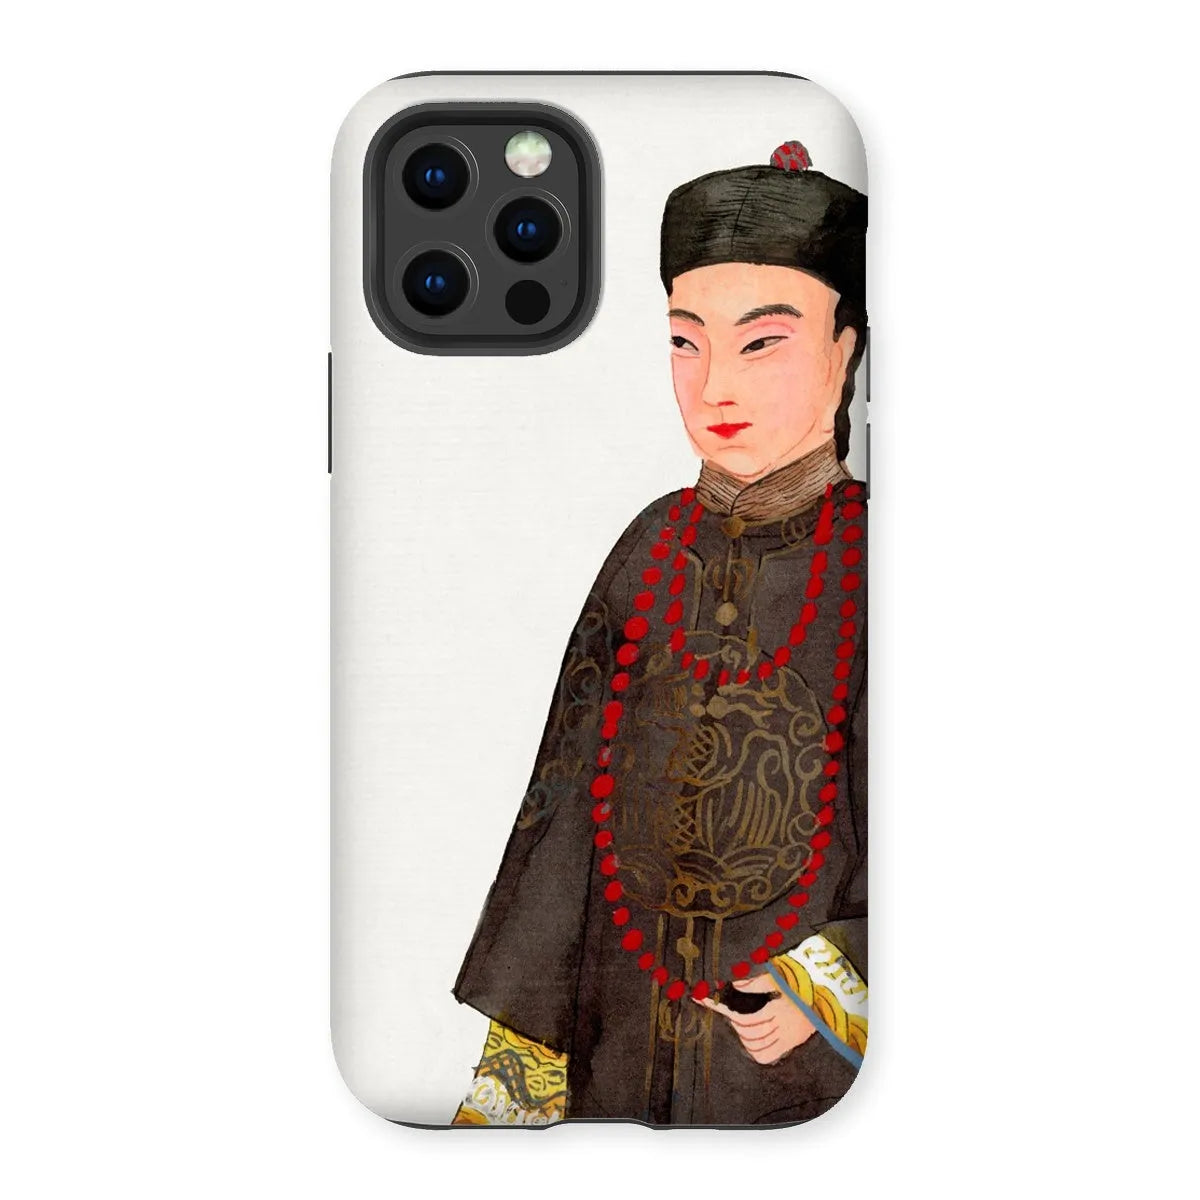 Emperor’s Courtier - Chinese Manchu Aesthetic Art Phone Case - Iphone 12 Pro / Matte - Mobile Phone Cases - Aesthetic